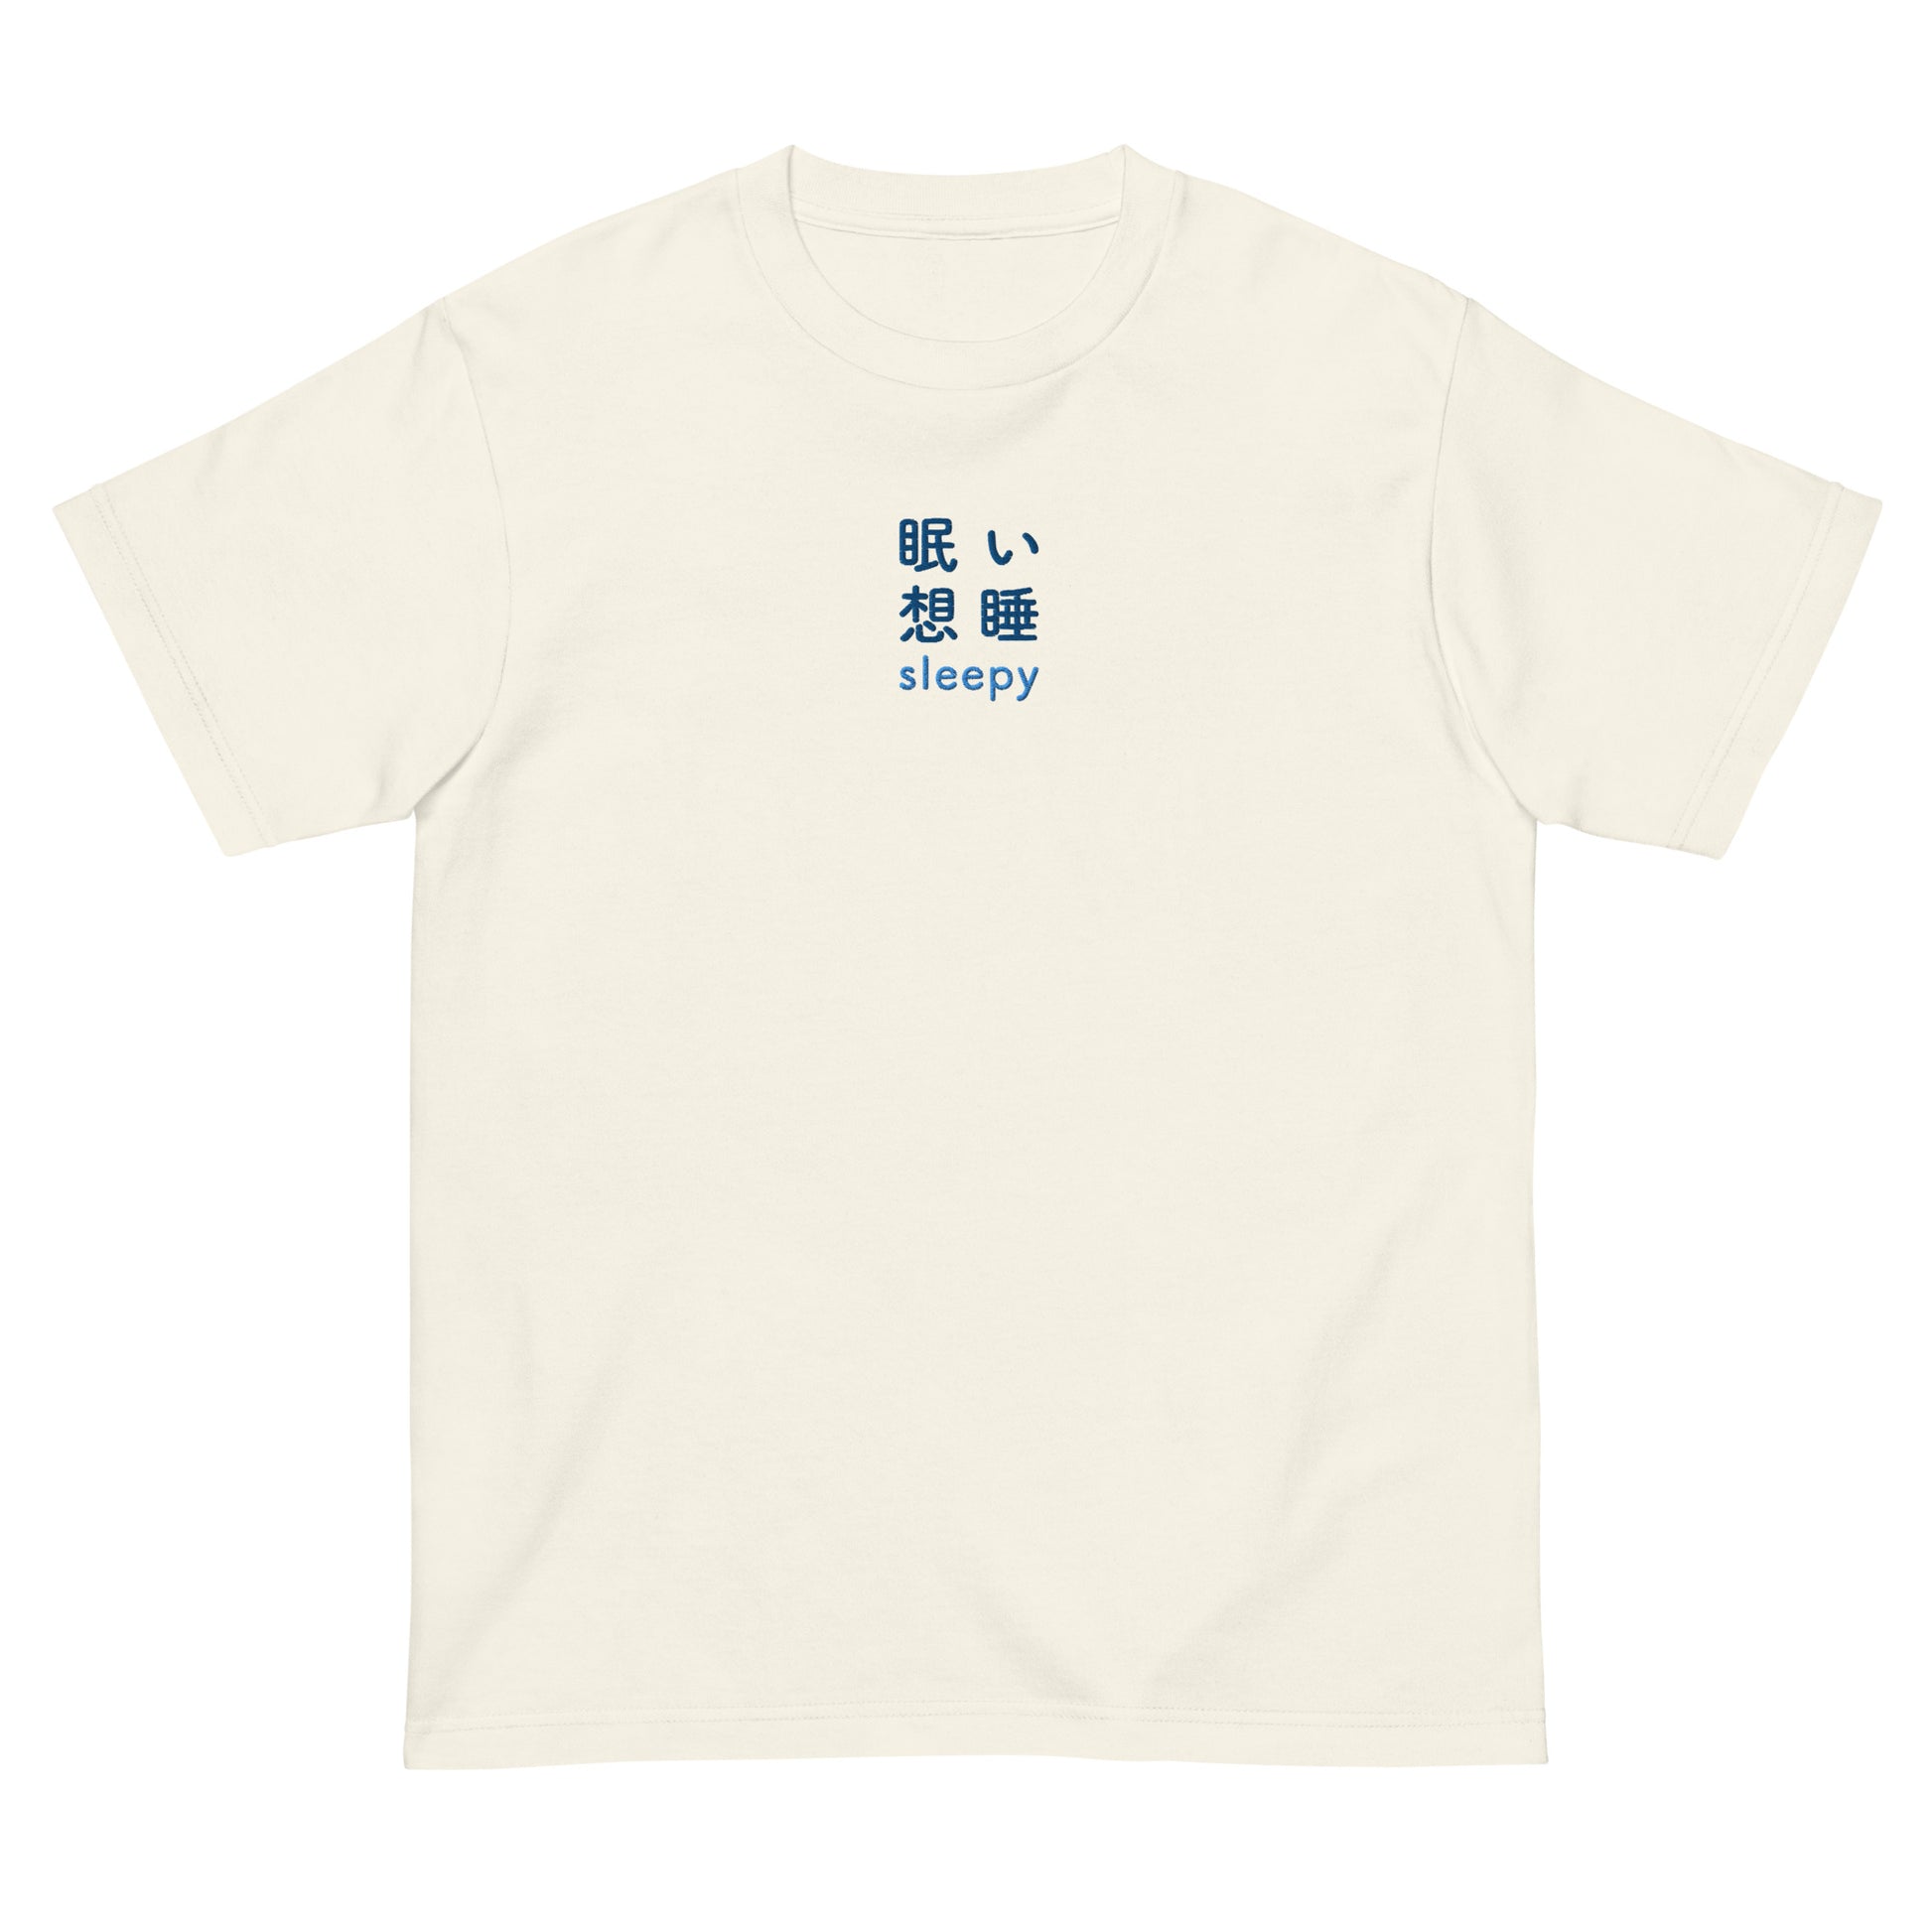 Ivory High Quality Tee - Front Design with an Blue Embroidery "Sleepy" in Japanese,Chinese and English